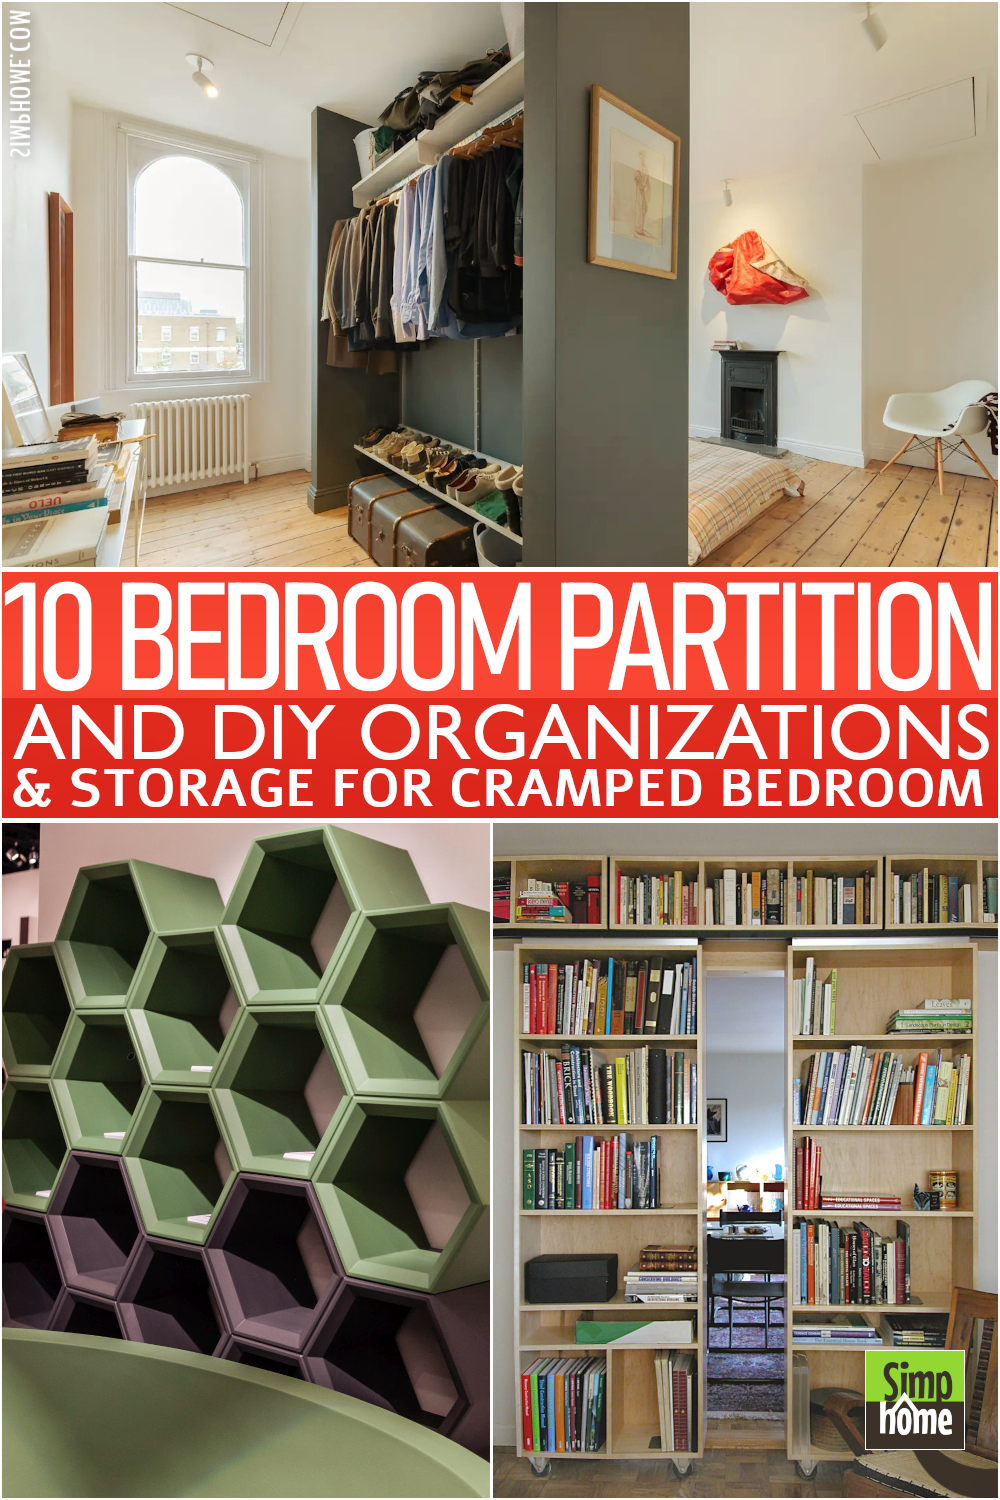 10 Bedroom Partition with Storage Poster